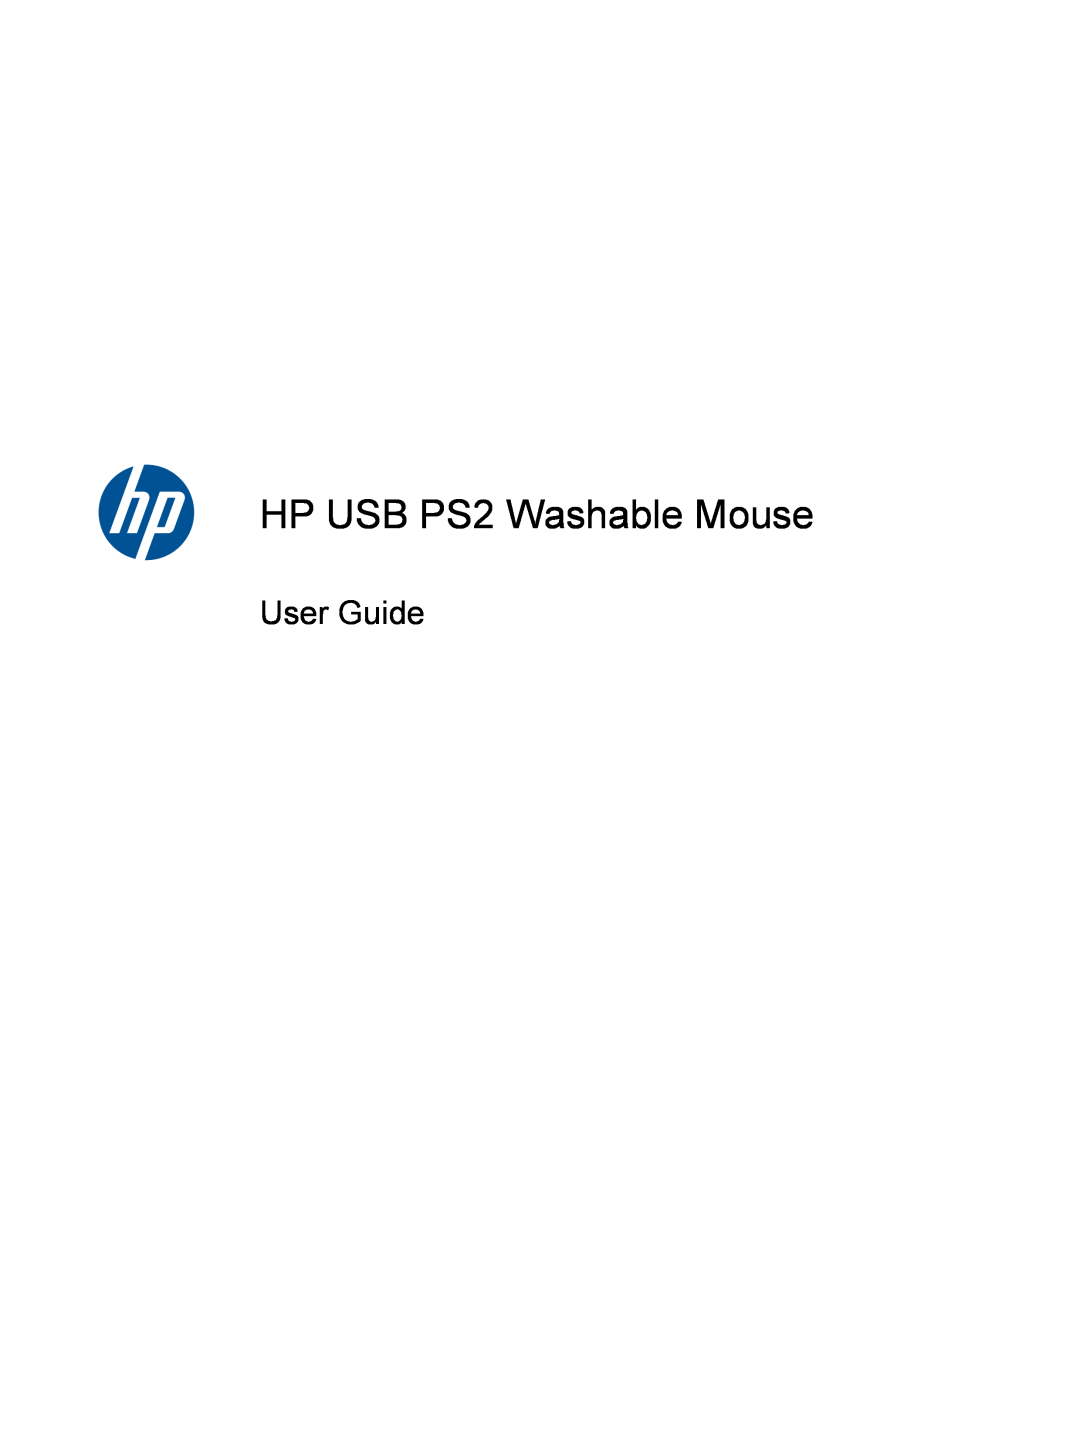 HP 8000 tower manual HP USB PS2 Washable Mouse, User Guide 